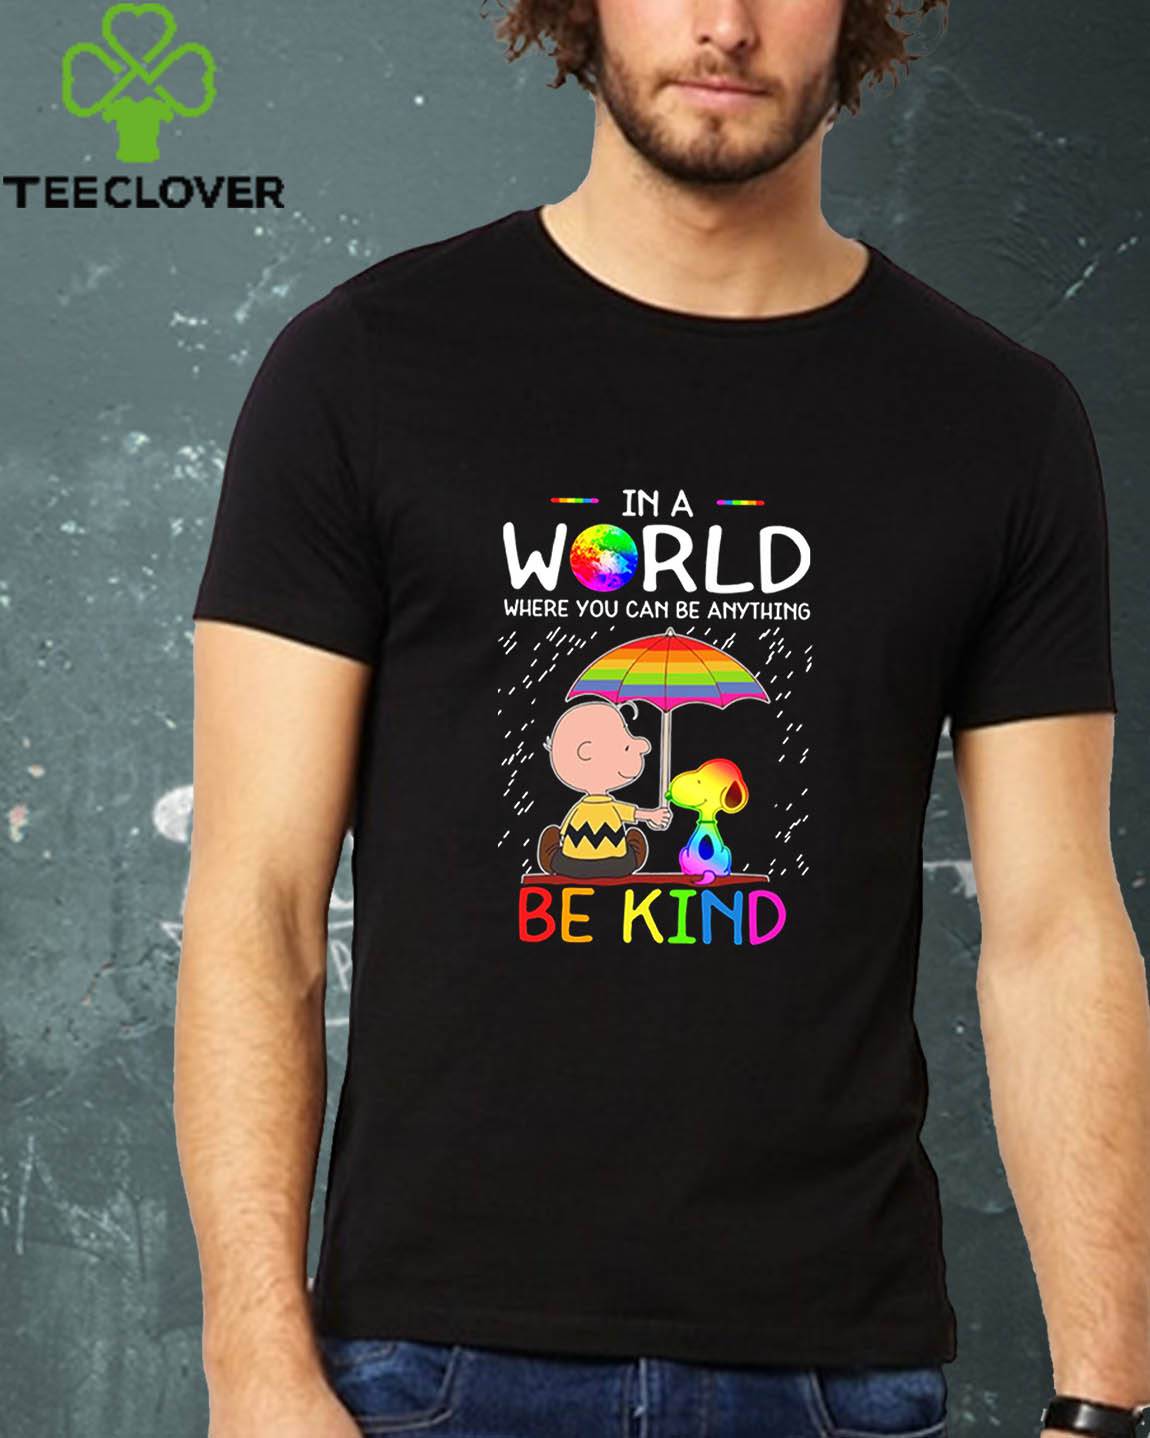 Charlie Brown Snoopy In a world where you can be anything be kind LGBT